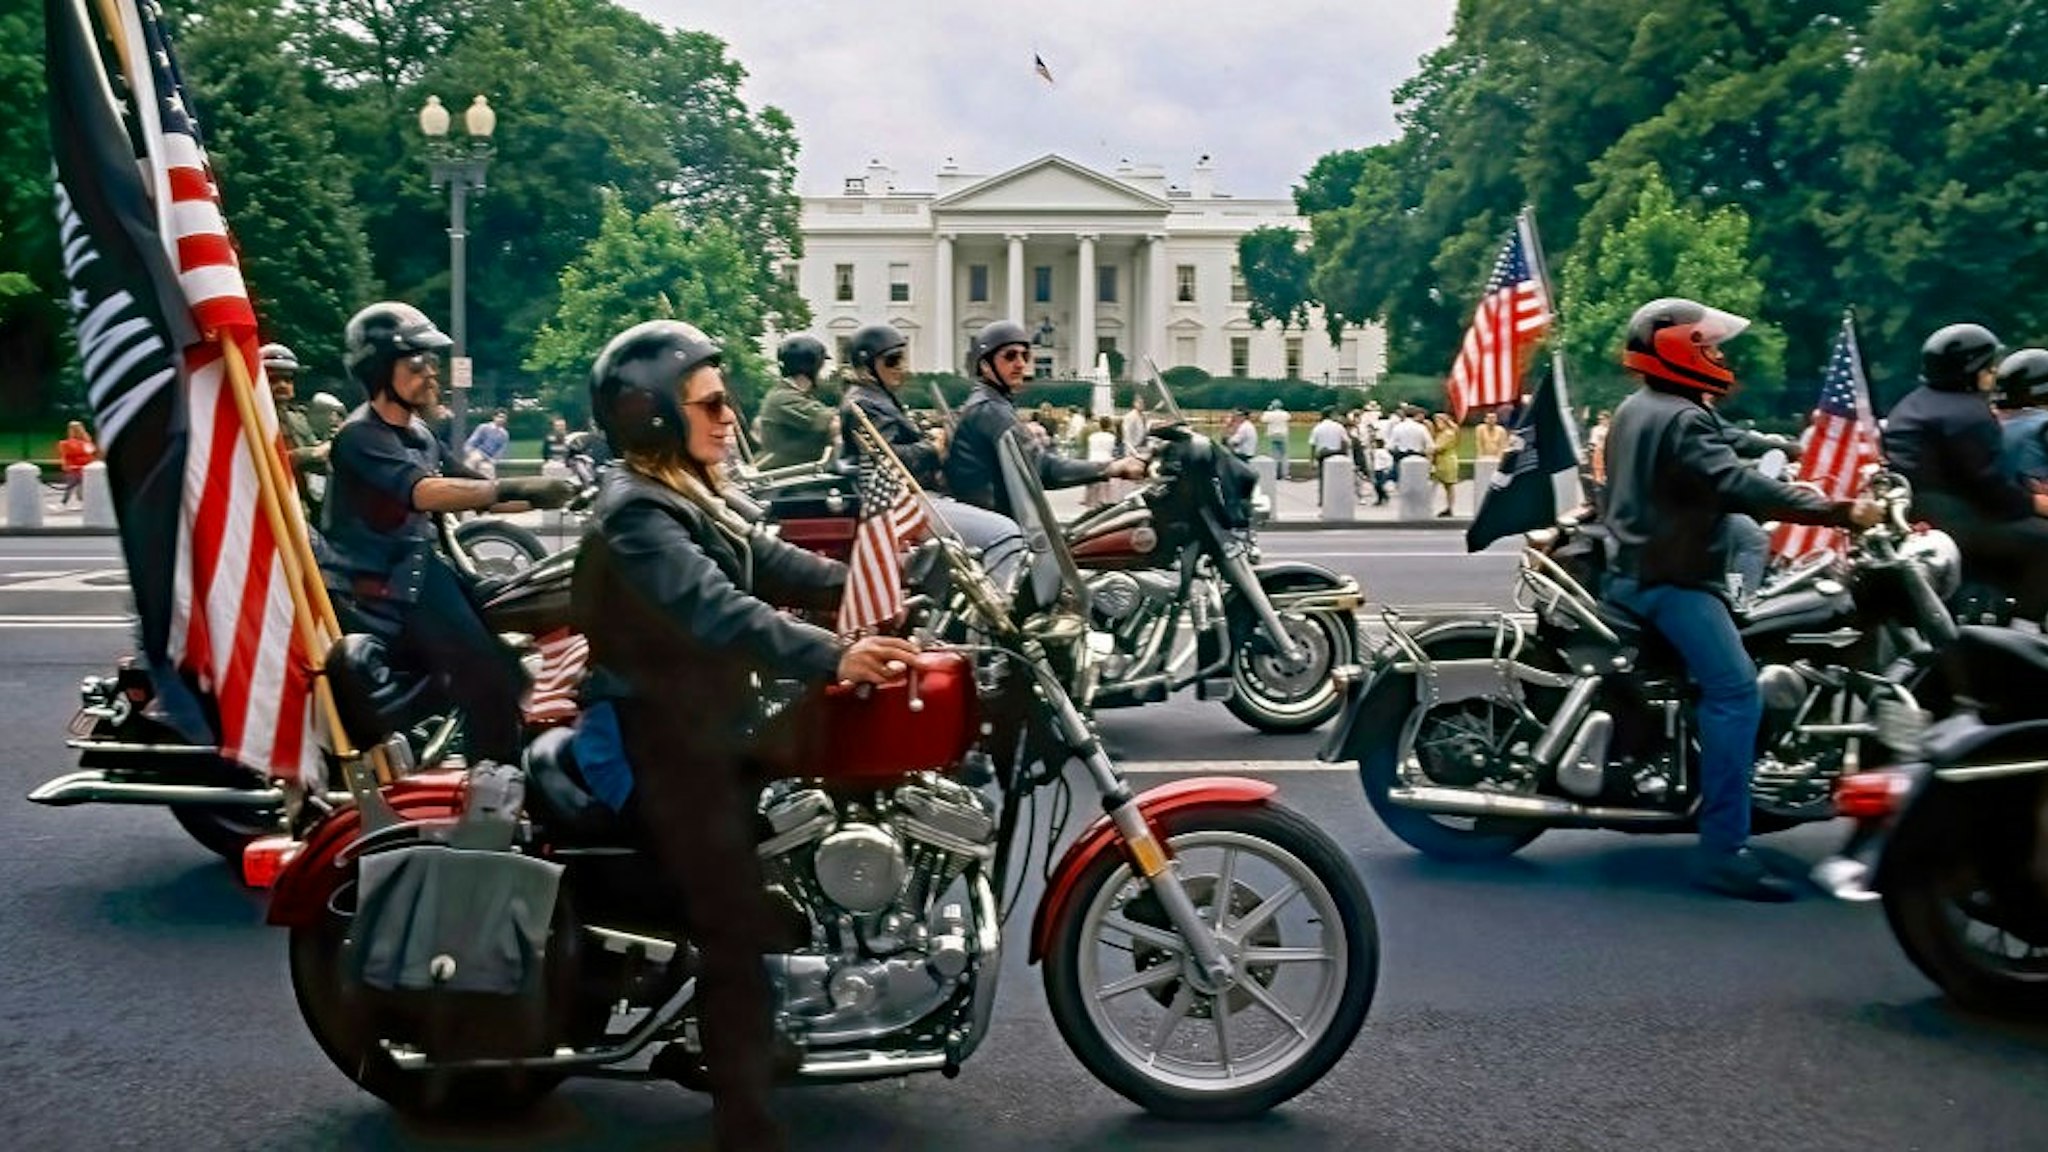 The 3rd "u201cRolling Thunder"u201d freedom ride roars past the North Lawn of the White House "nWashington DC. May 27, 1990 (Photo by